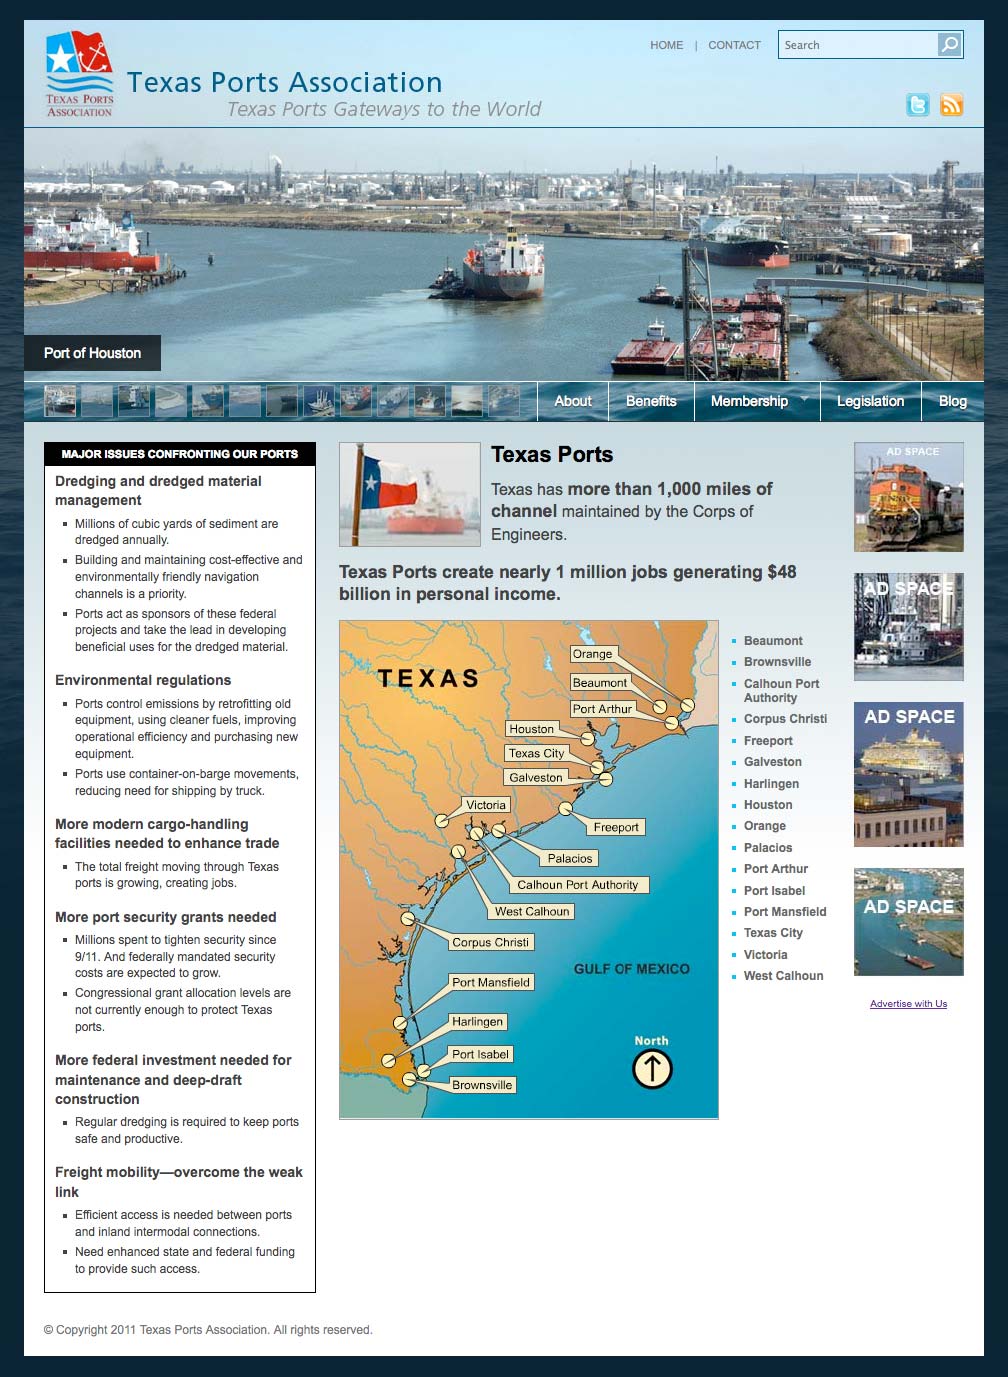 homepage of the Texas Ports Association website